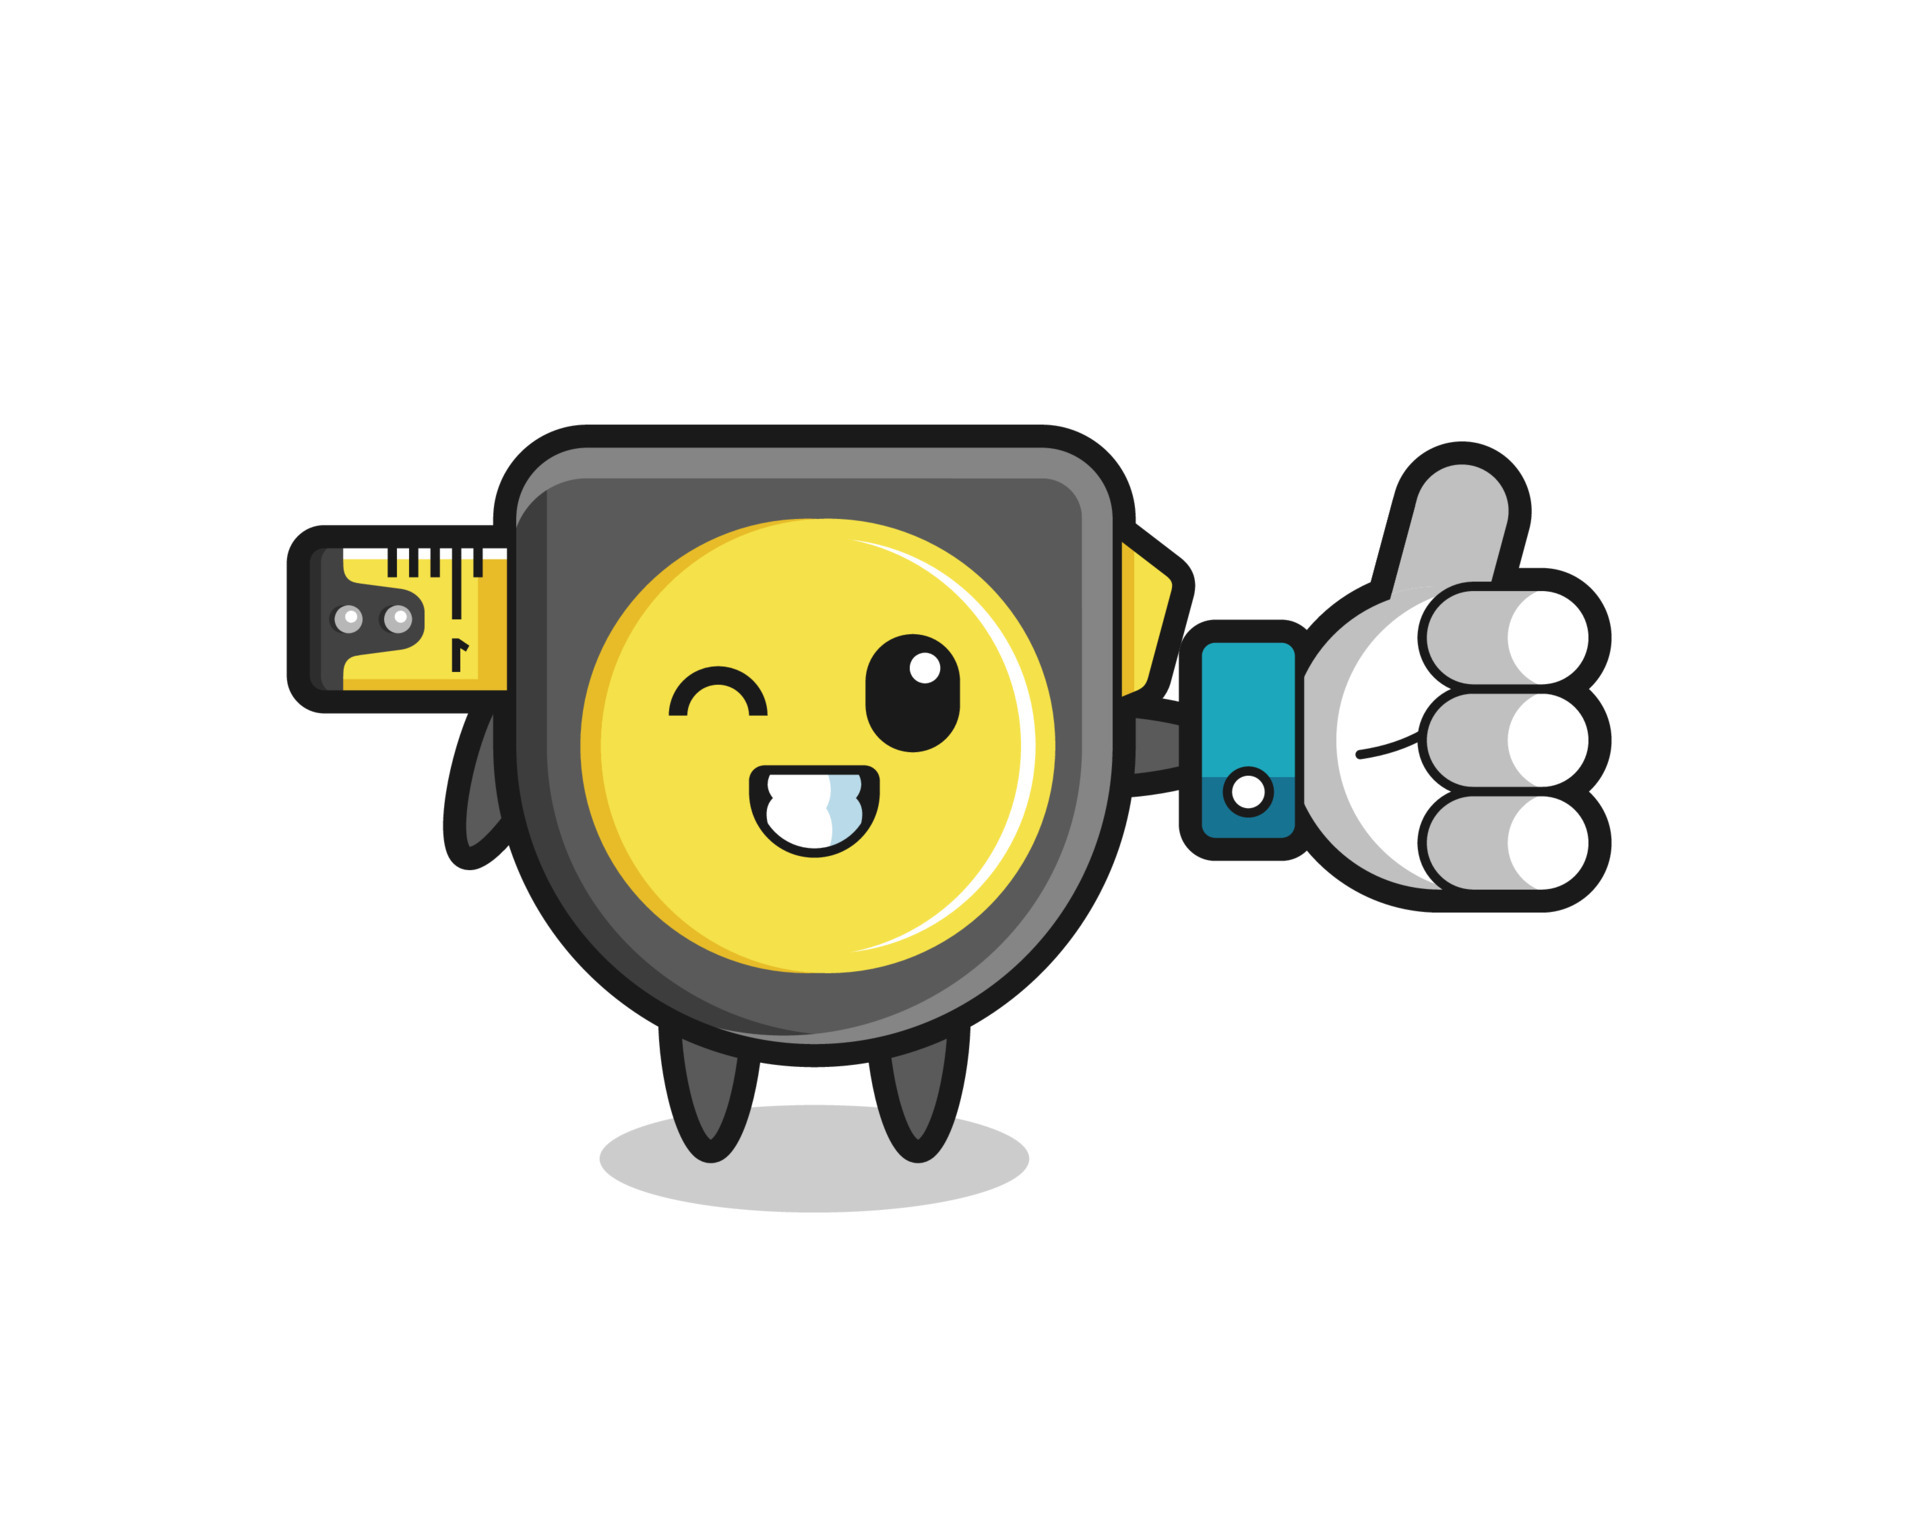 https://static.vecteezy.com/system/resources/previews/006/743/343/original/cute-tape-measure-with-social-media-thumbs-up-symbol-vector.jpg